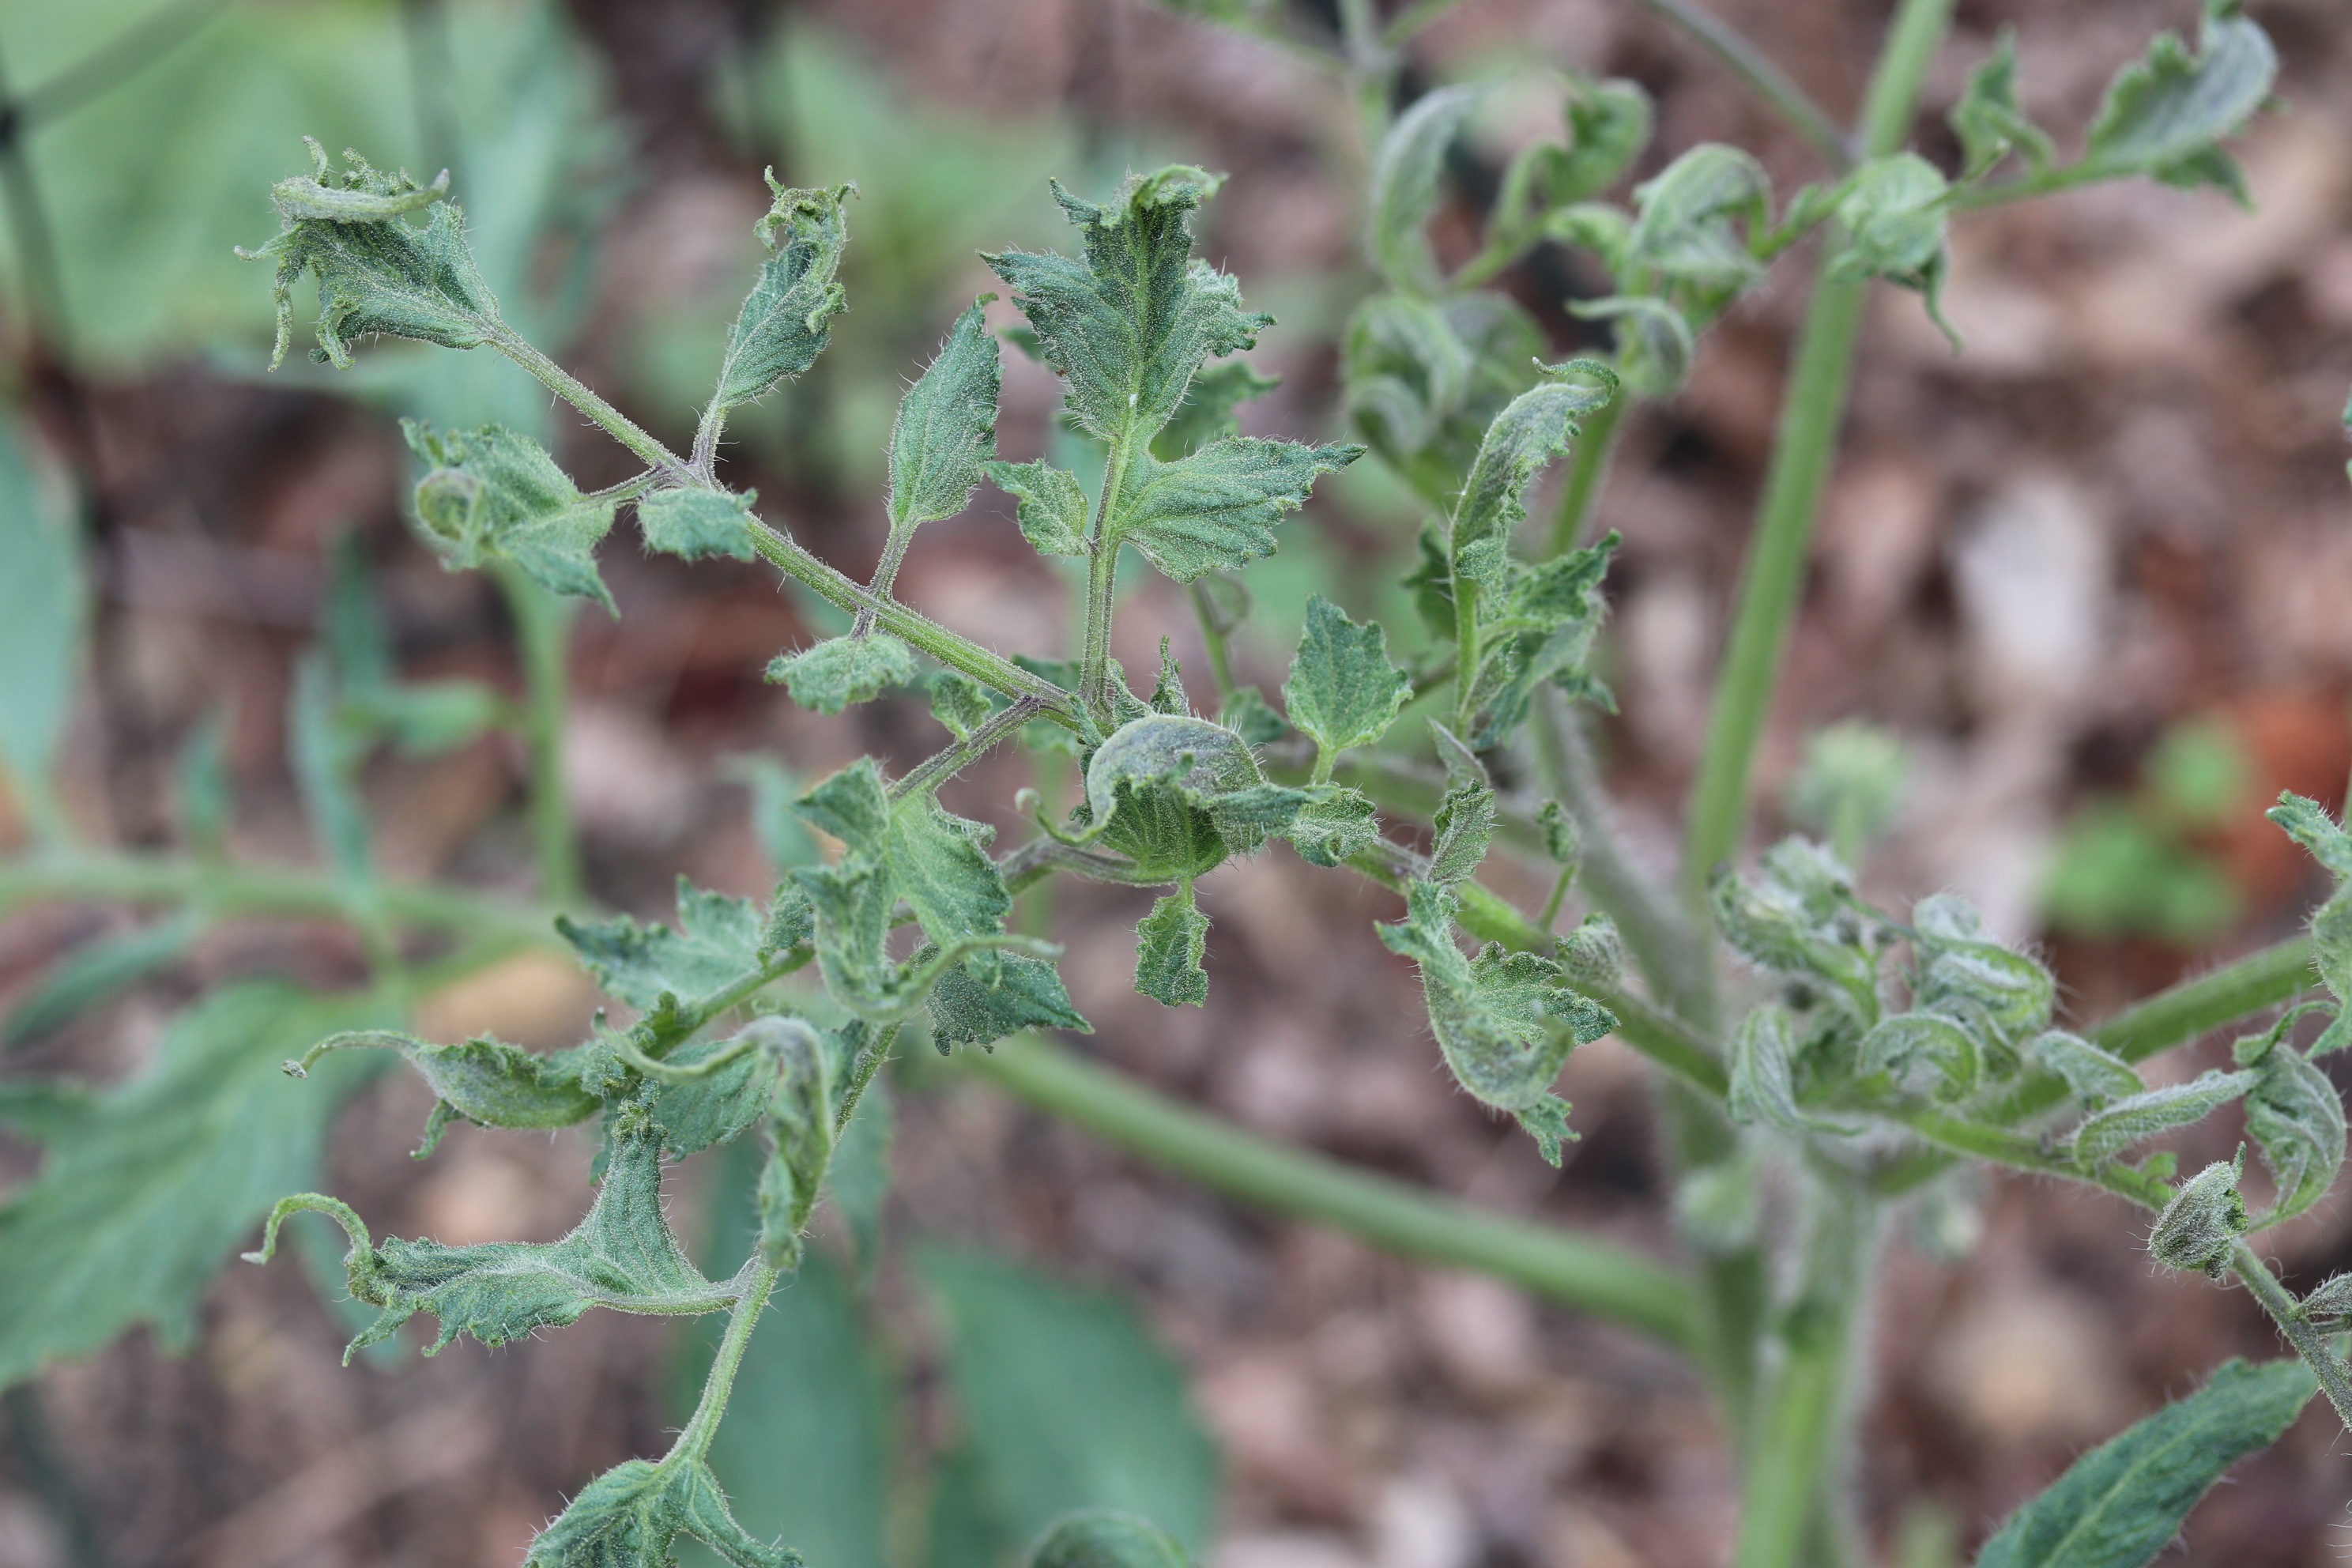 his tomato plant has the classic look of being affected by herbicide carryover. (Credit Dr. Joe Neal, NC State University, Professor of Weed Science and Extension Specialist) 